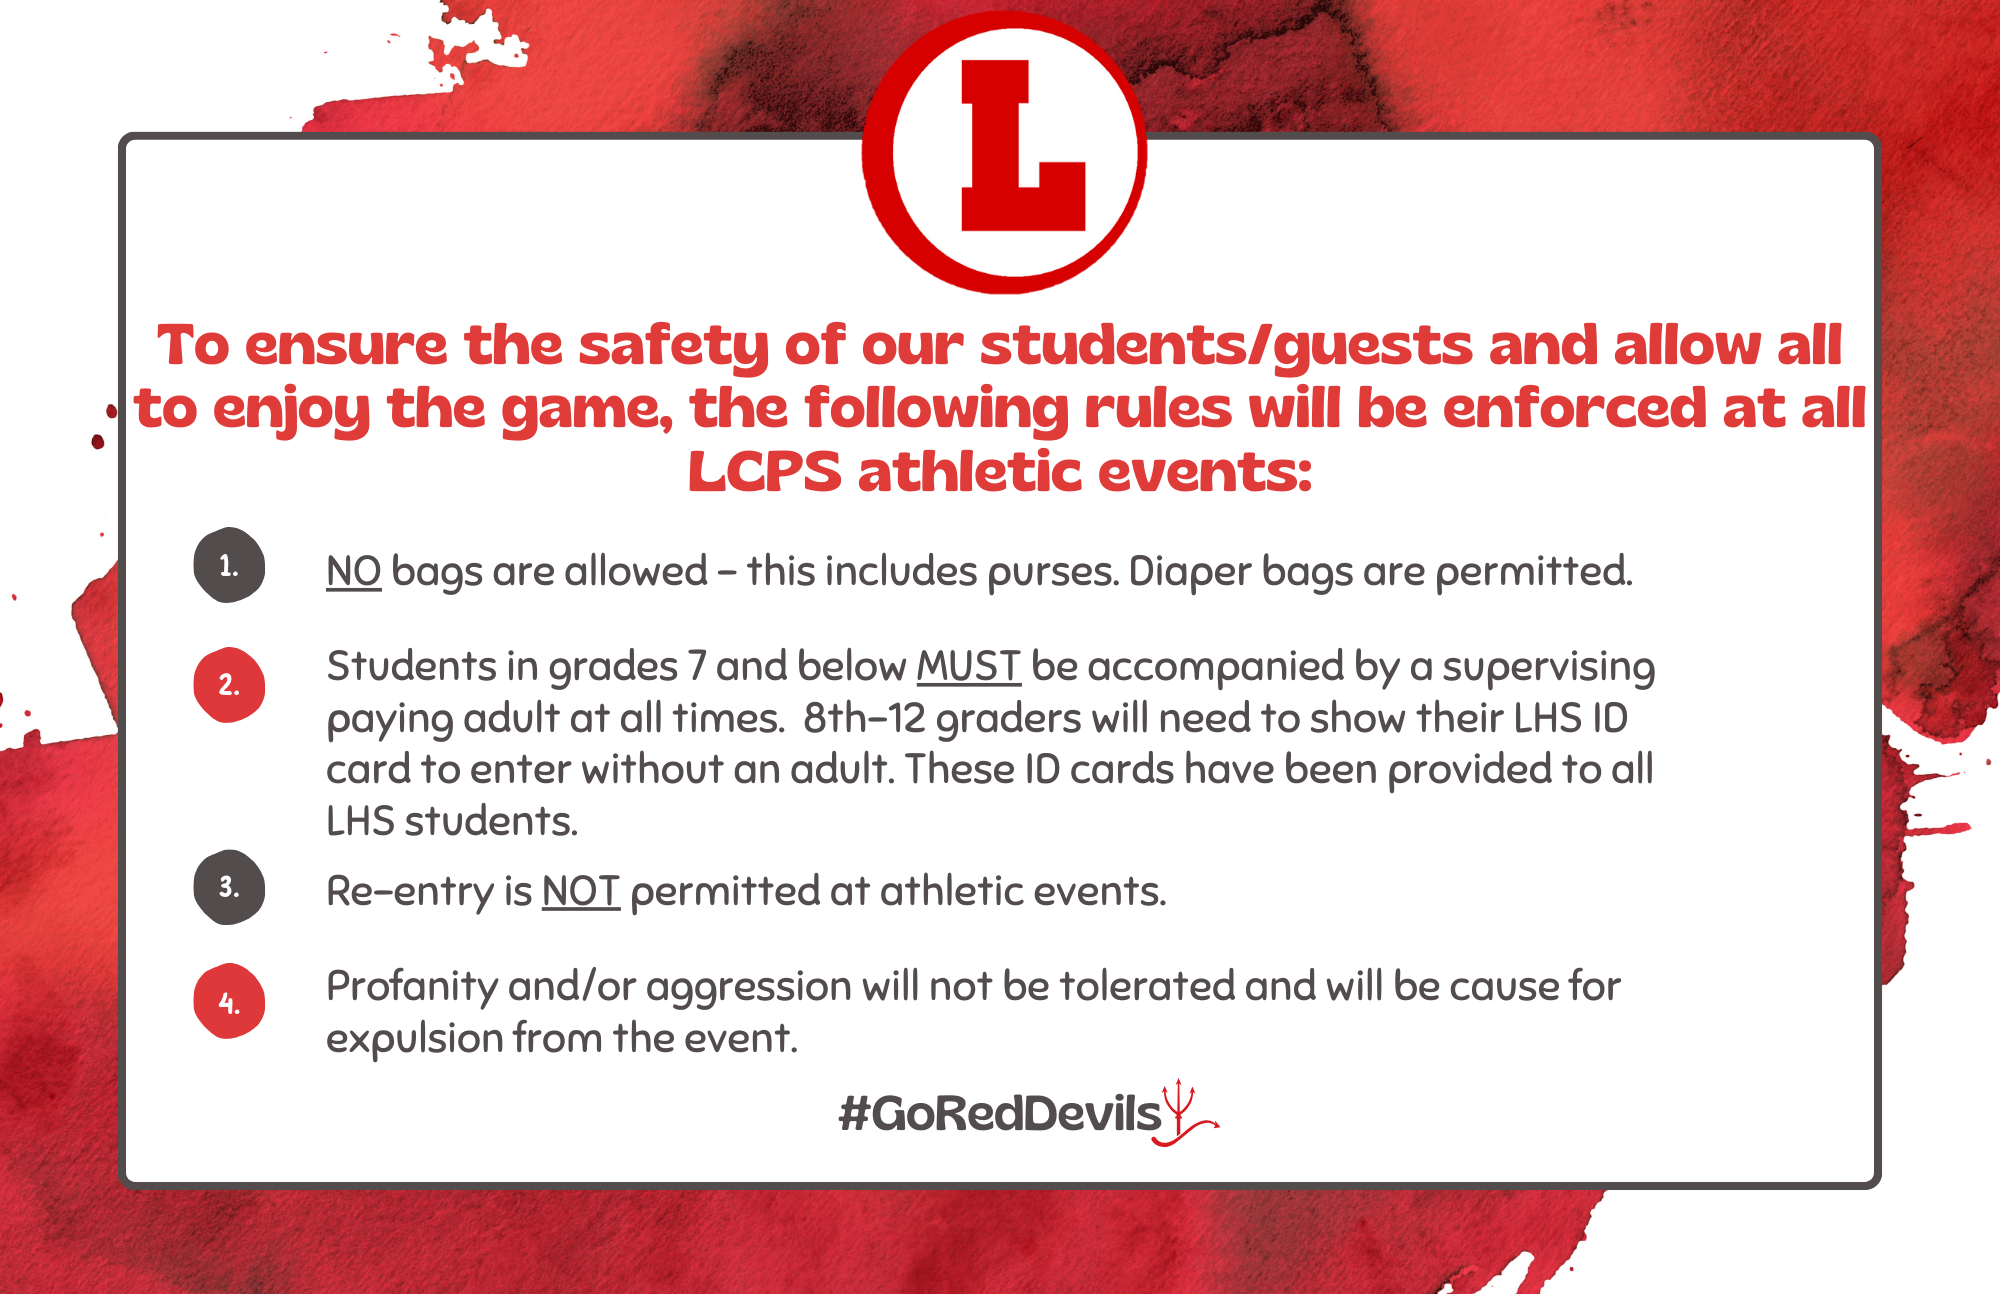 To ensure the safety of our students/guests and allow all to enjoy the game, the following rules will be enforced at all LCPS athletic events. 1) No bags are allowed - this includes purses. Diaper bags are permitted. 2) Students in grades 7 and below MUST be accompanied by a supervising paying adult at all times. 8th-12 graders will need to show their LHS ID card to enter without an adult. These ID cards have been provided to all LHS students. 3) Re-entry is NOT permitted at athletic events. 4) Profanity and/or aggression will not be tolerated and will be cause for expulsion from the event.